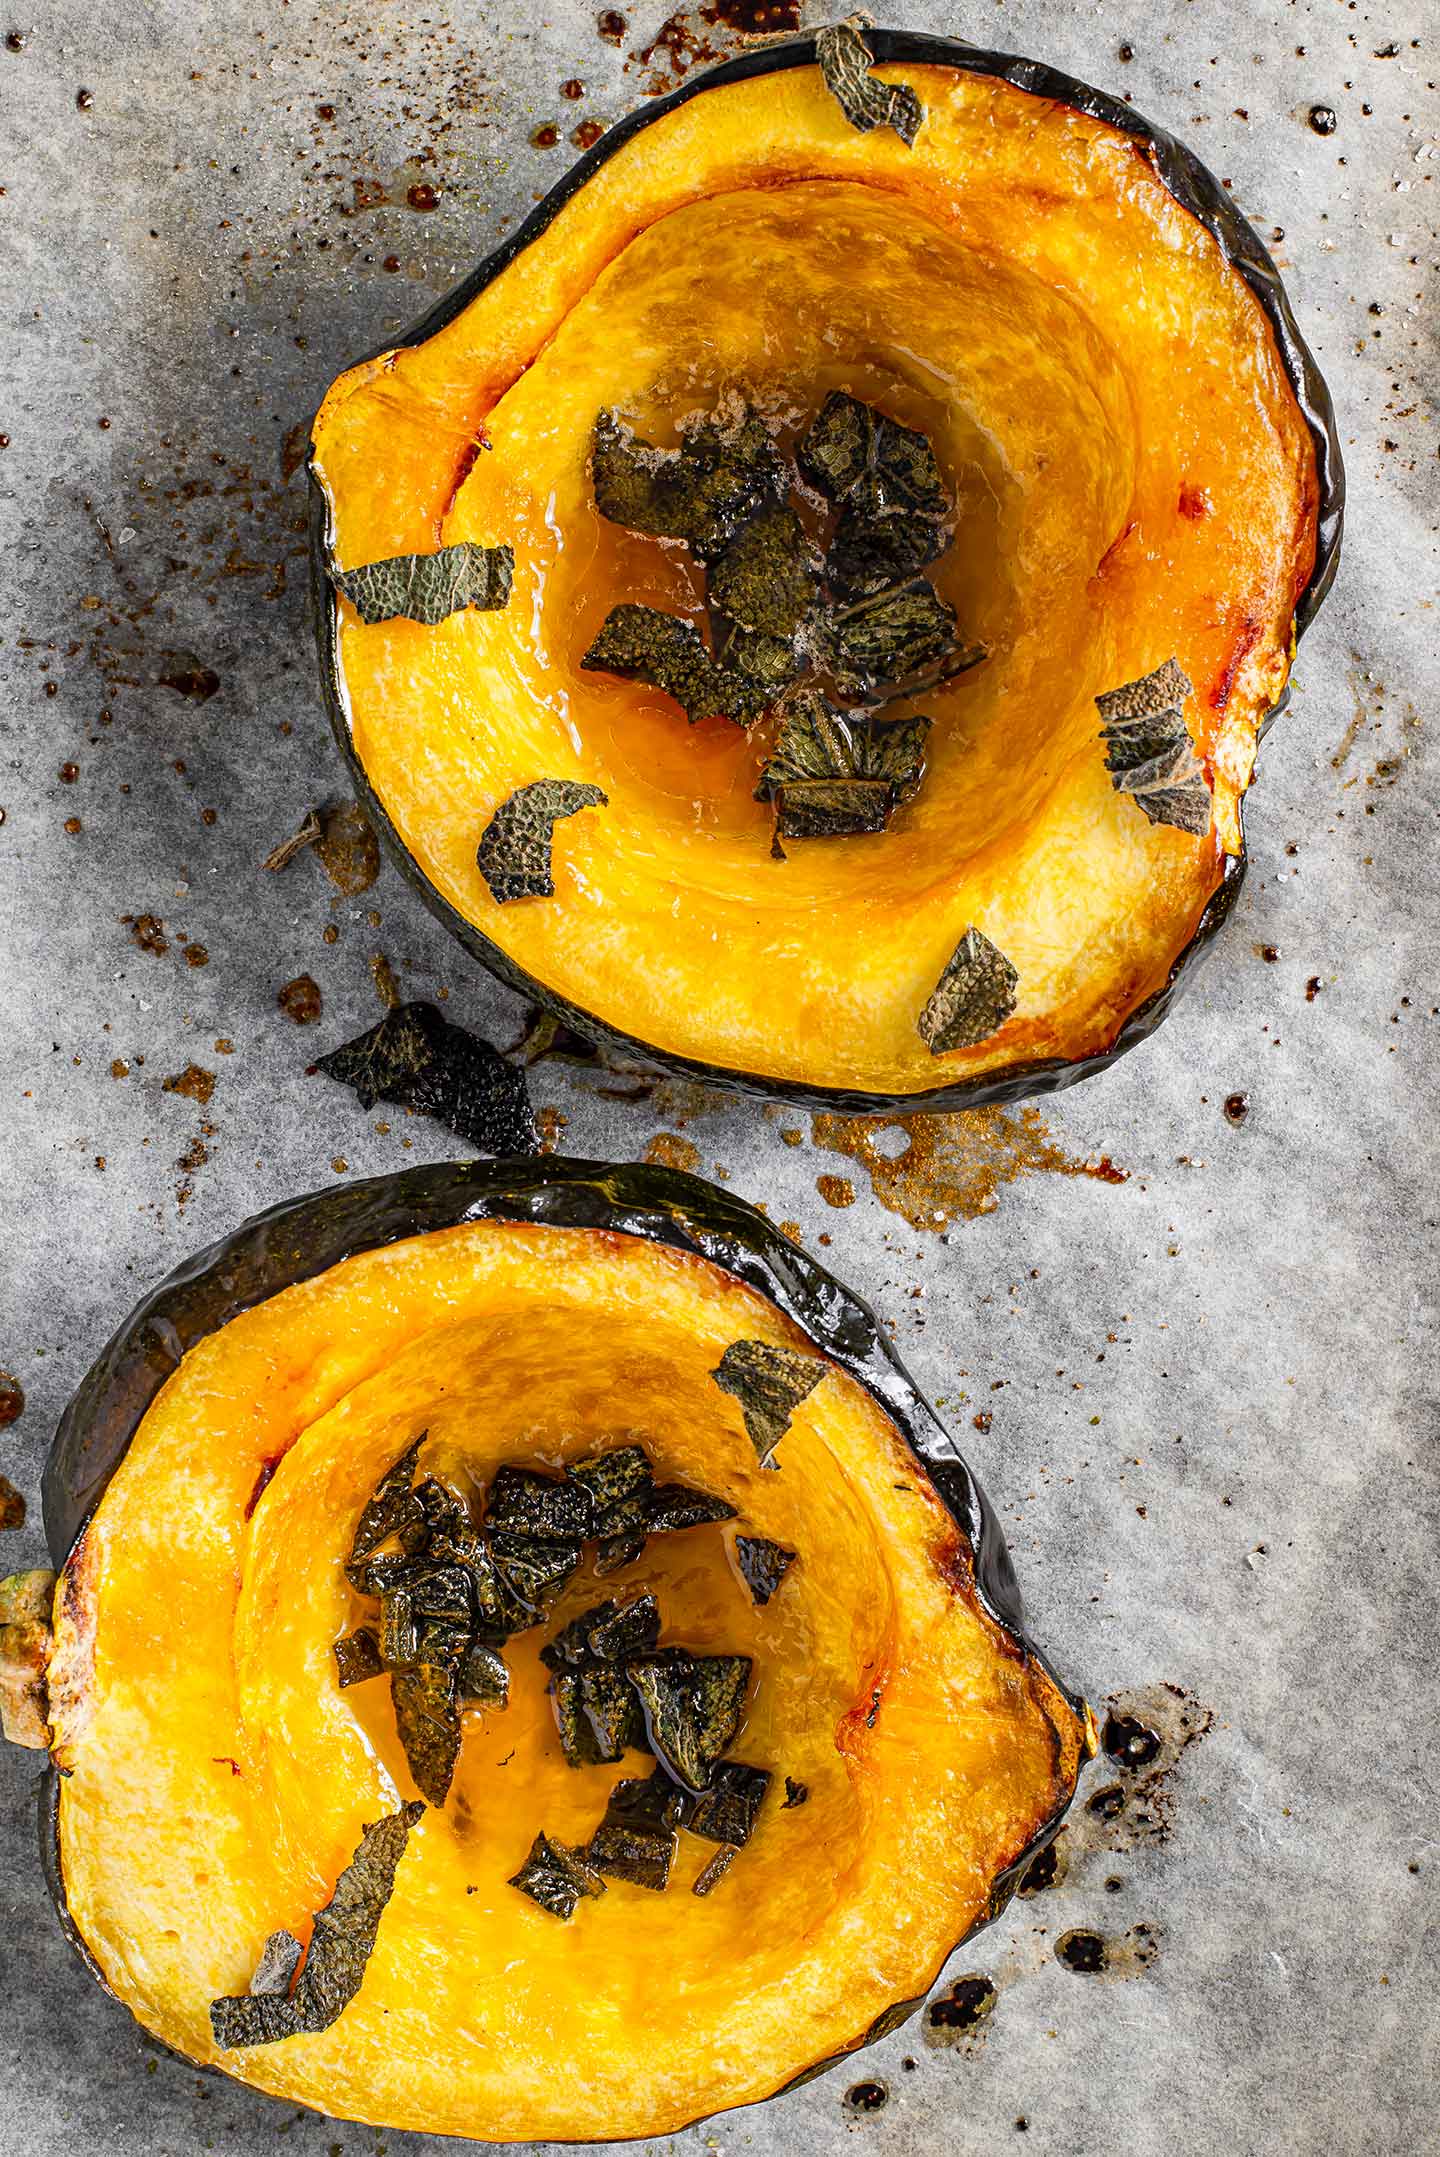 Top down view of maple roasted acorn squash halves on a parchment lined baking tray. The halves are caramelized, butter and maple syrup are pooled in the hollow centre, and sage leaves are scattered over the flesh.